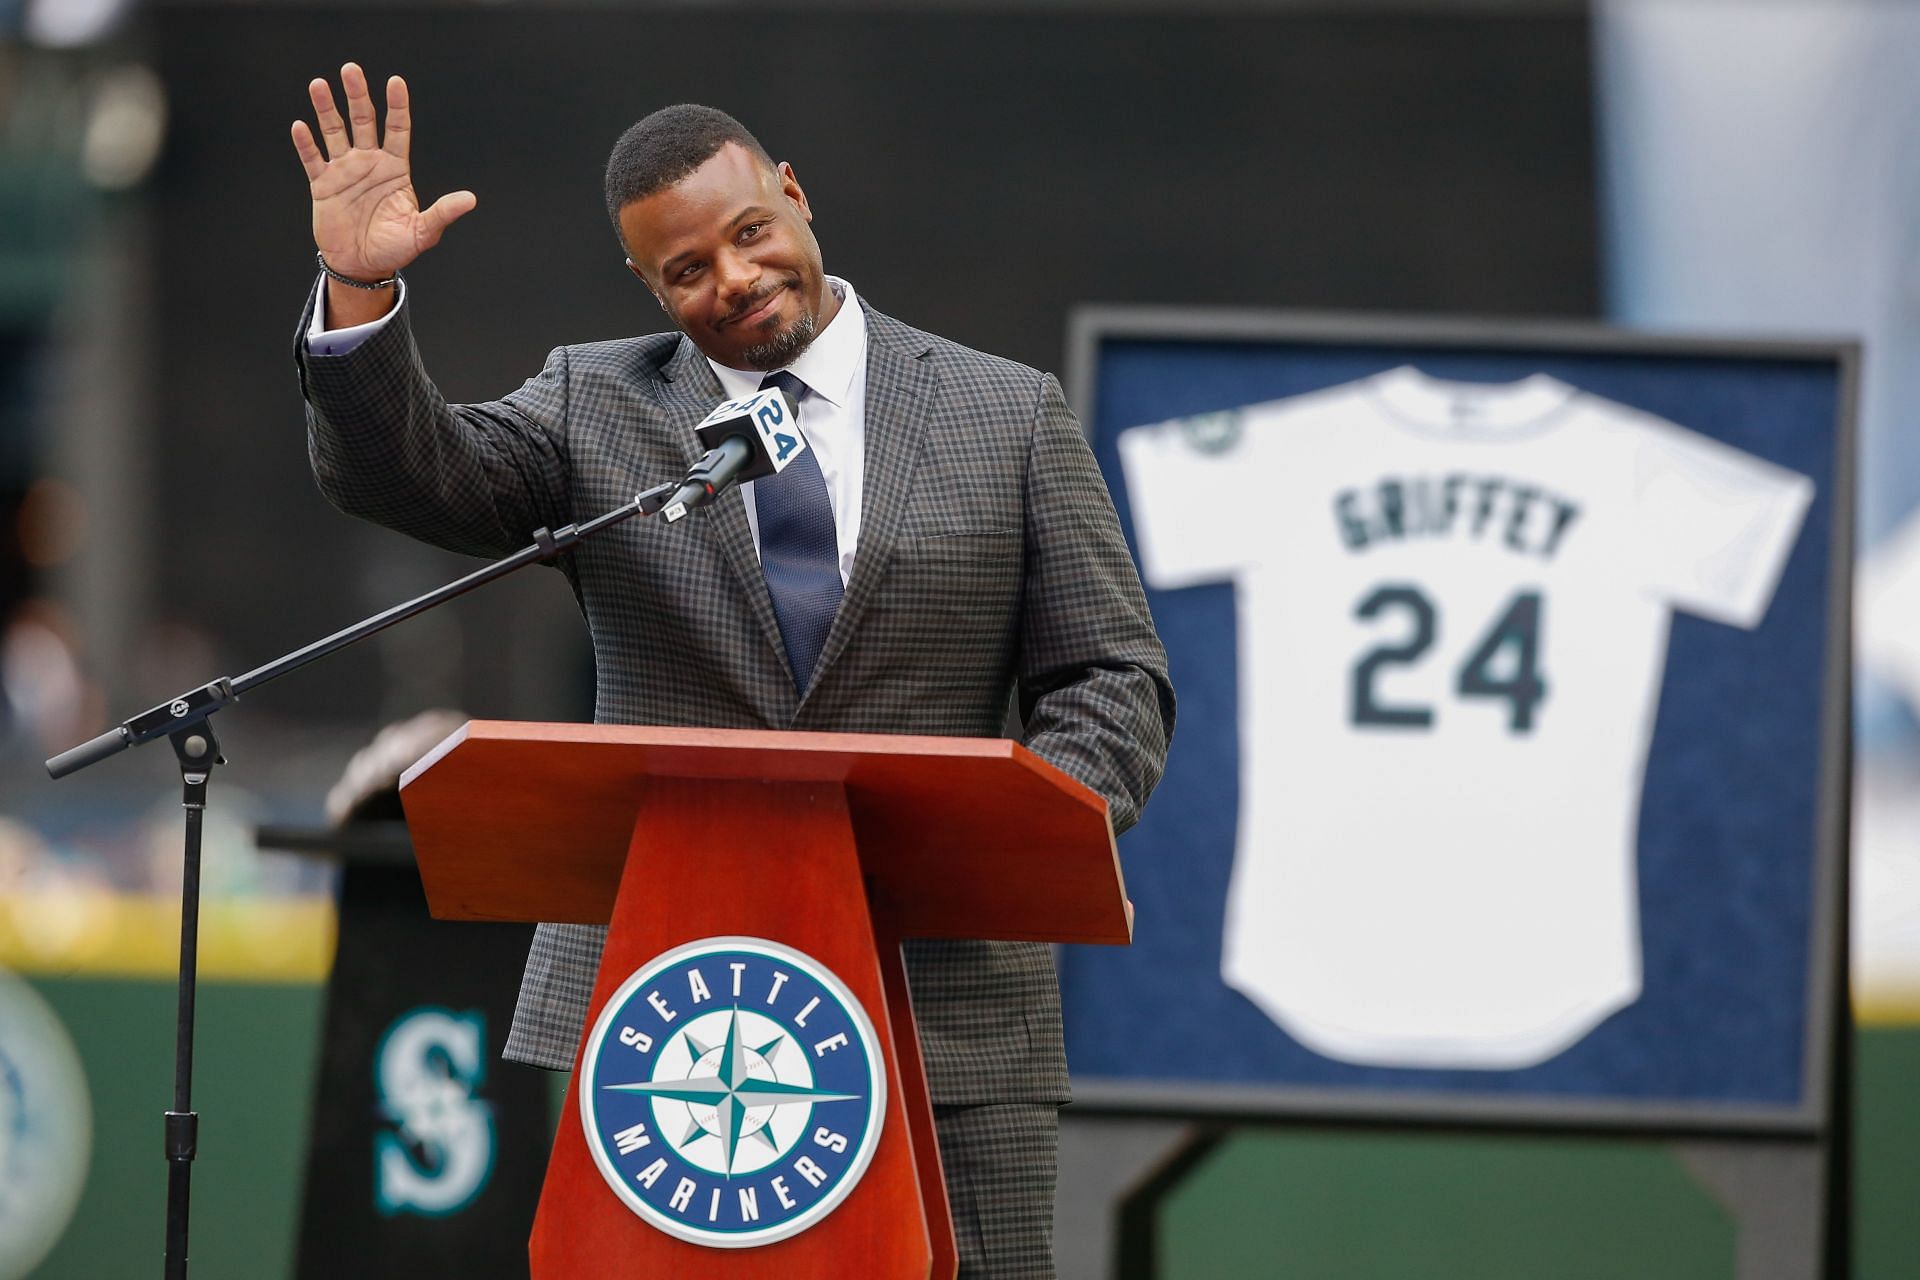 Former Mariner Ken Griffey Jr. waves to the crowd during a jersey retirement ceremony at Safeco Field